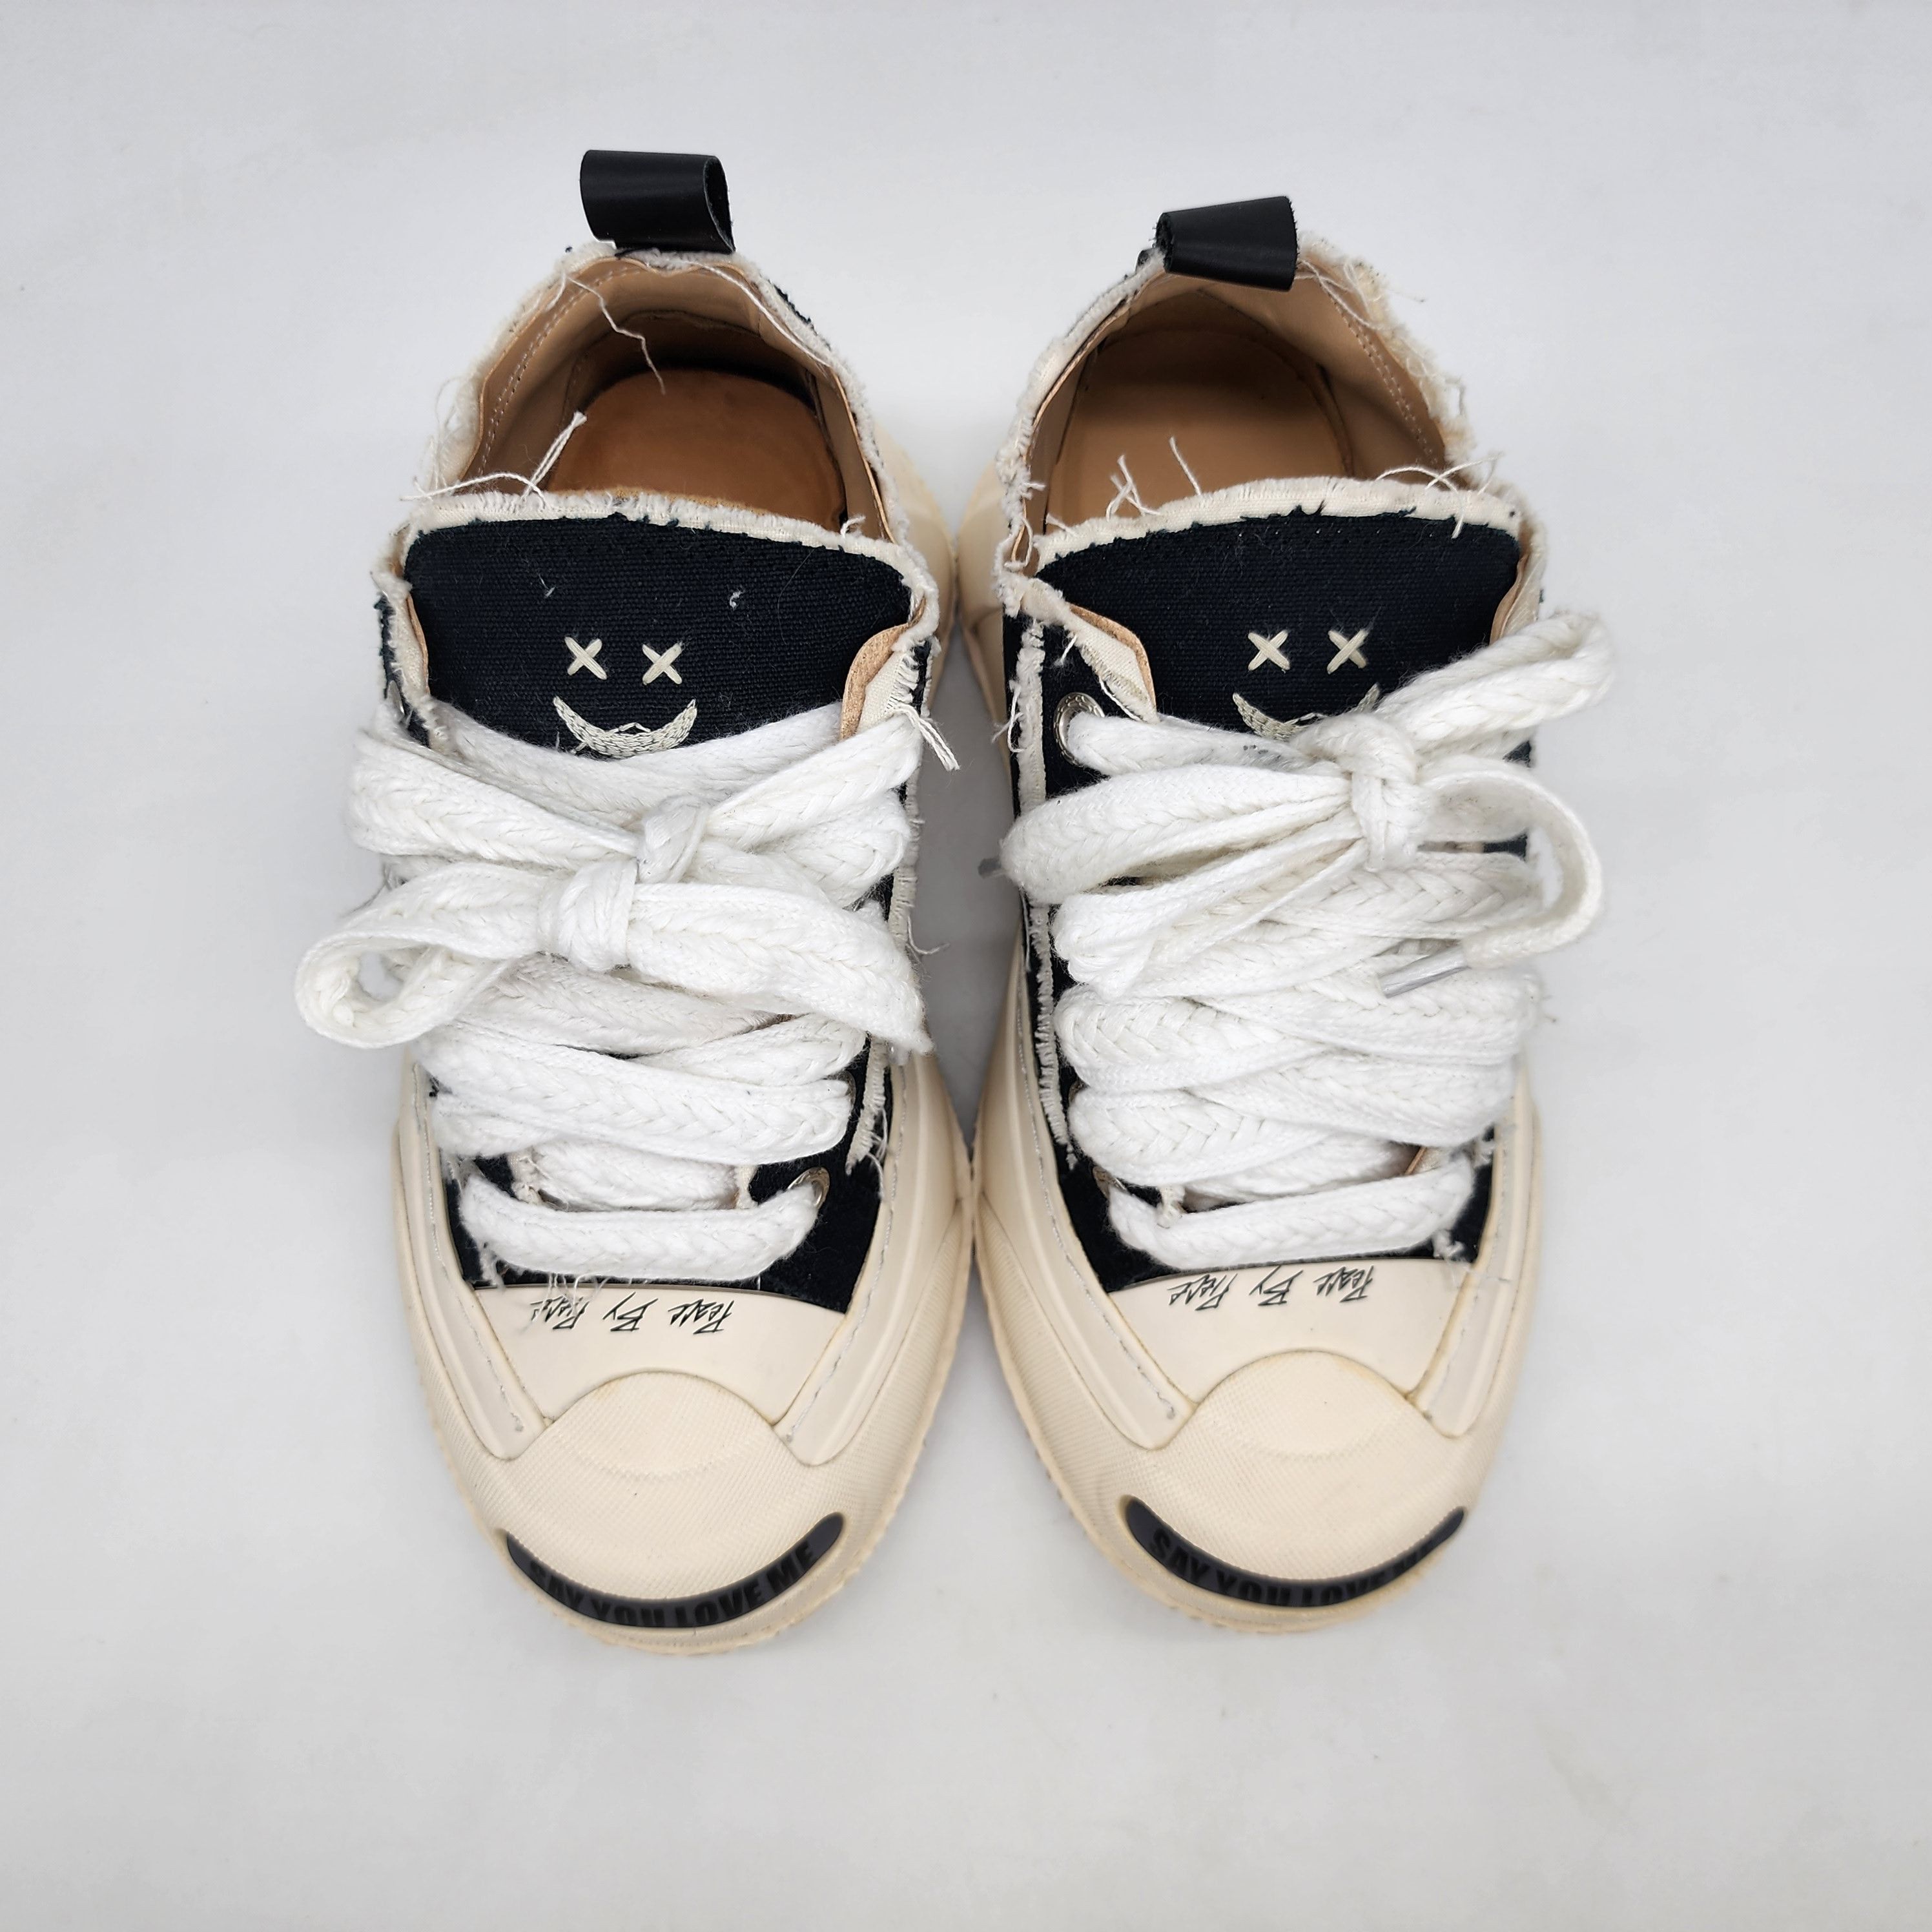 XVESSEL - G.O.P. 2.0 MARSHMALLOW LOWS BLACK - 3